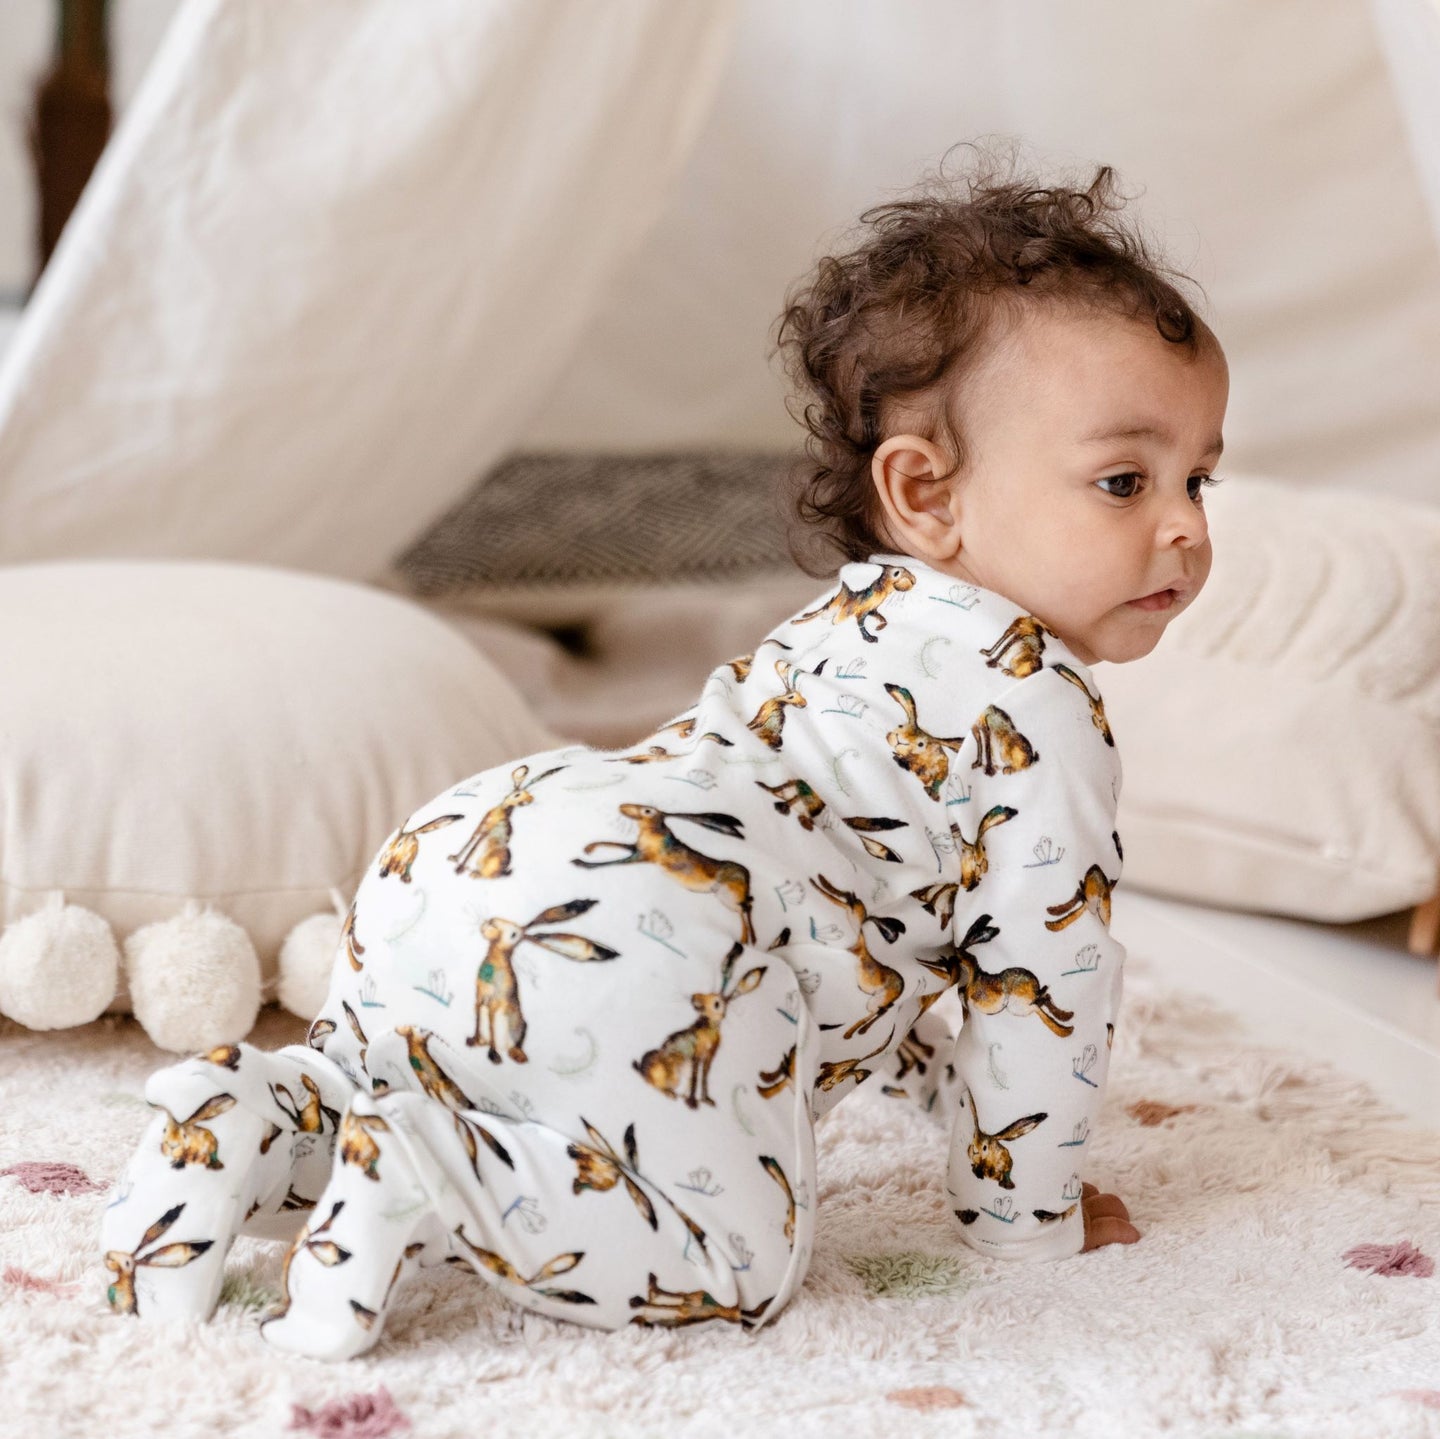 6 month old baby girl crawling wearing Molly Hare print babygrow